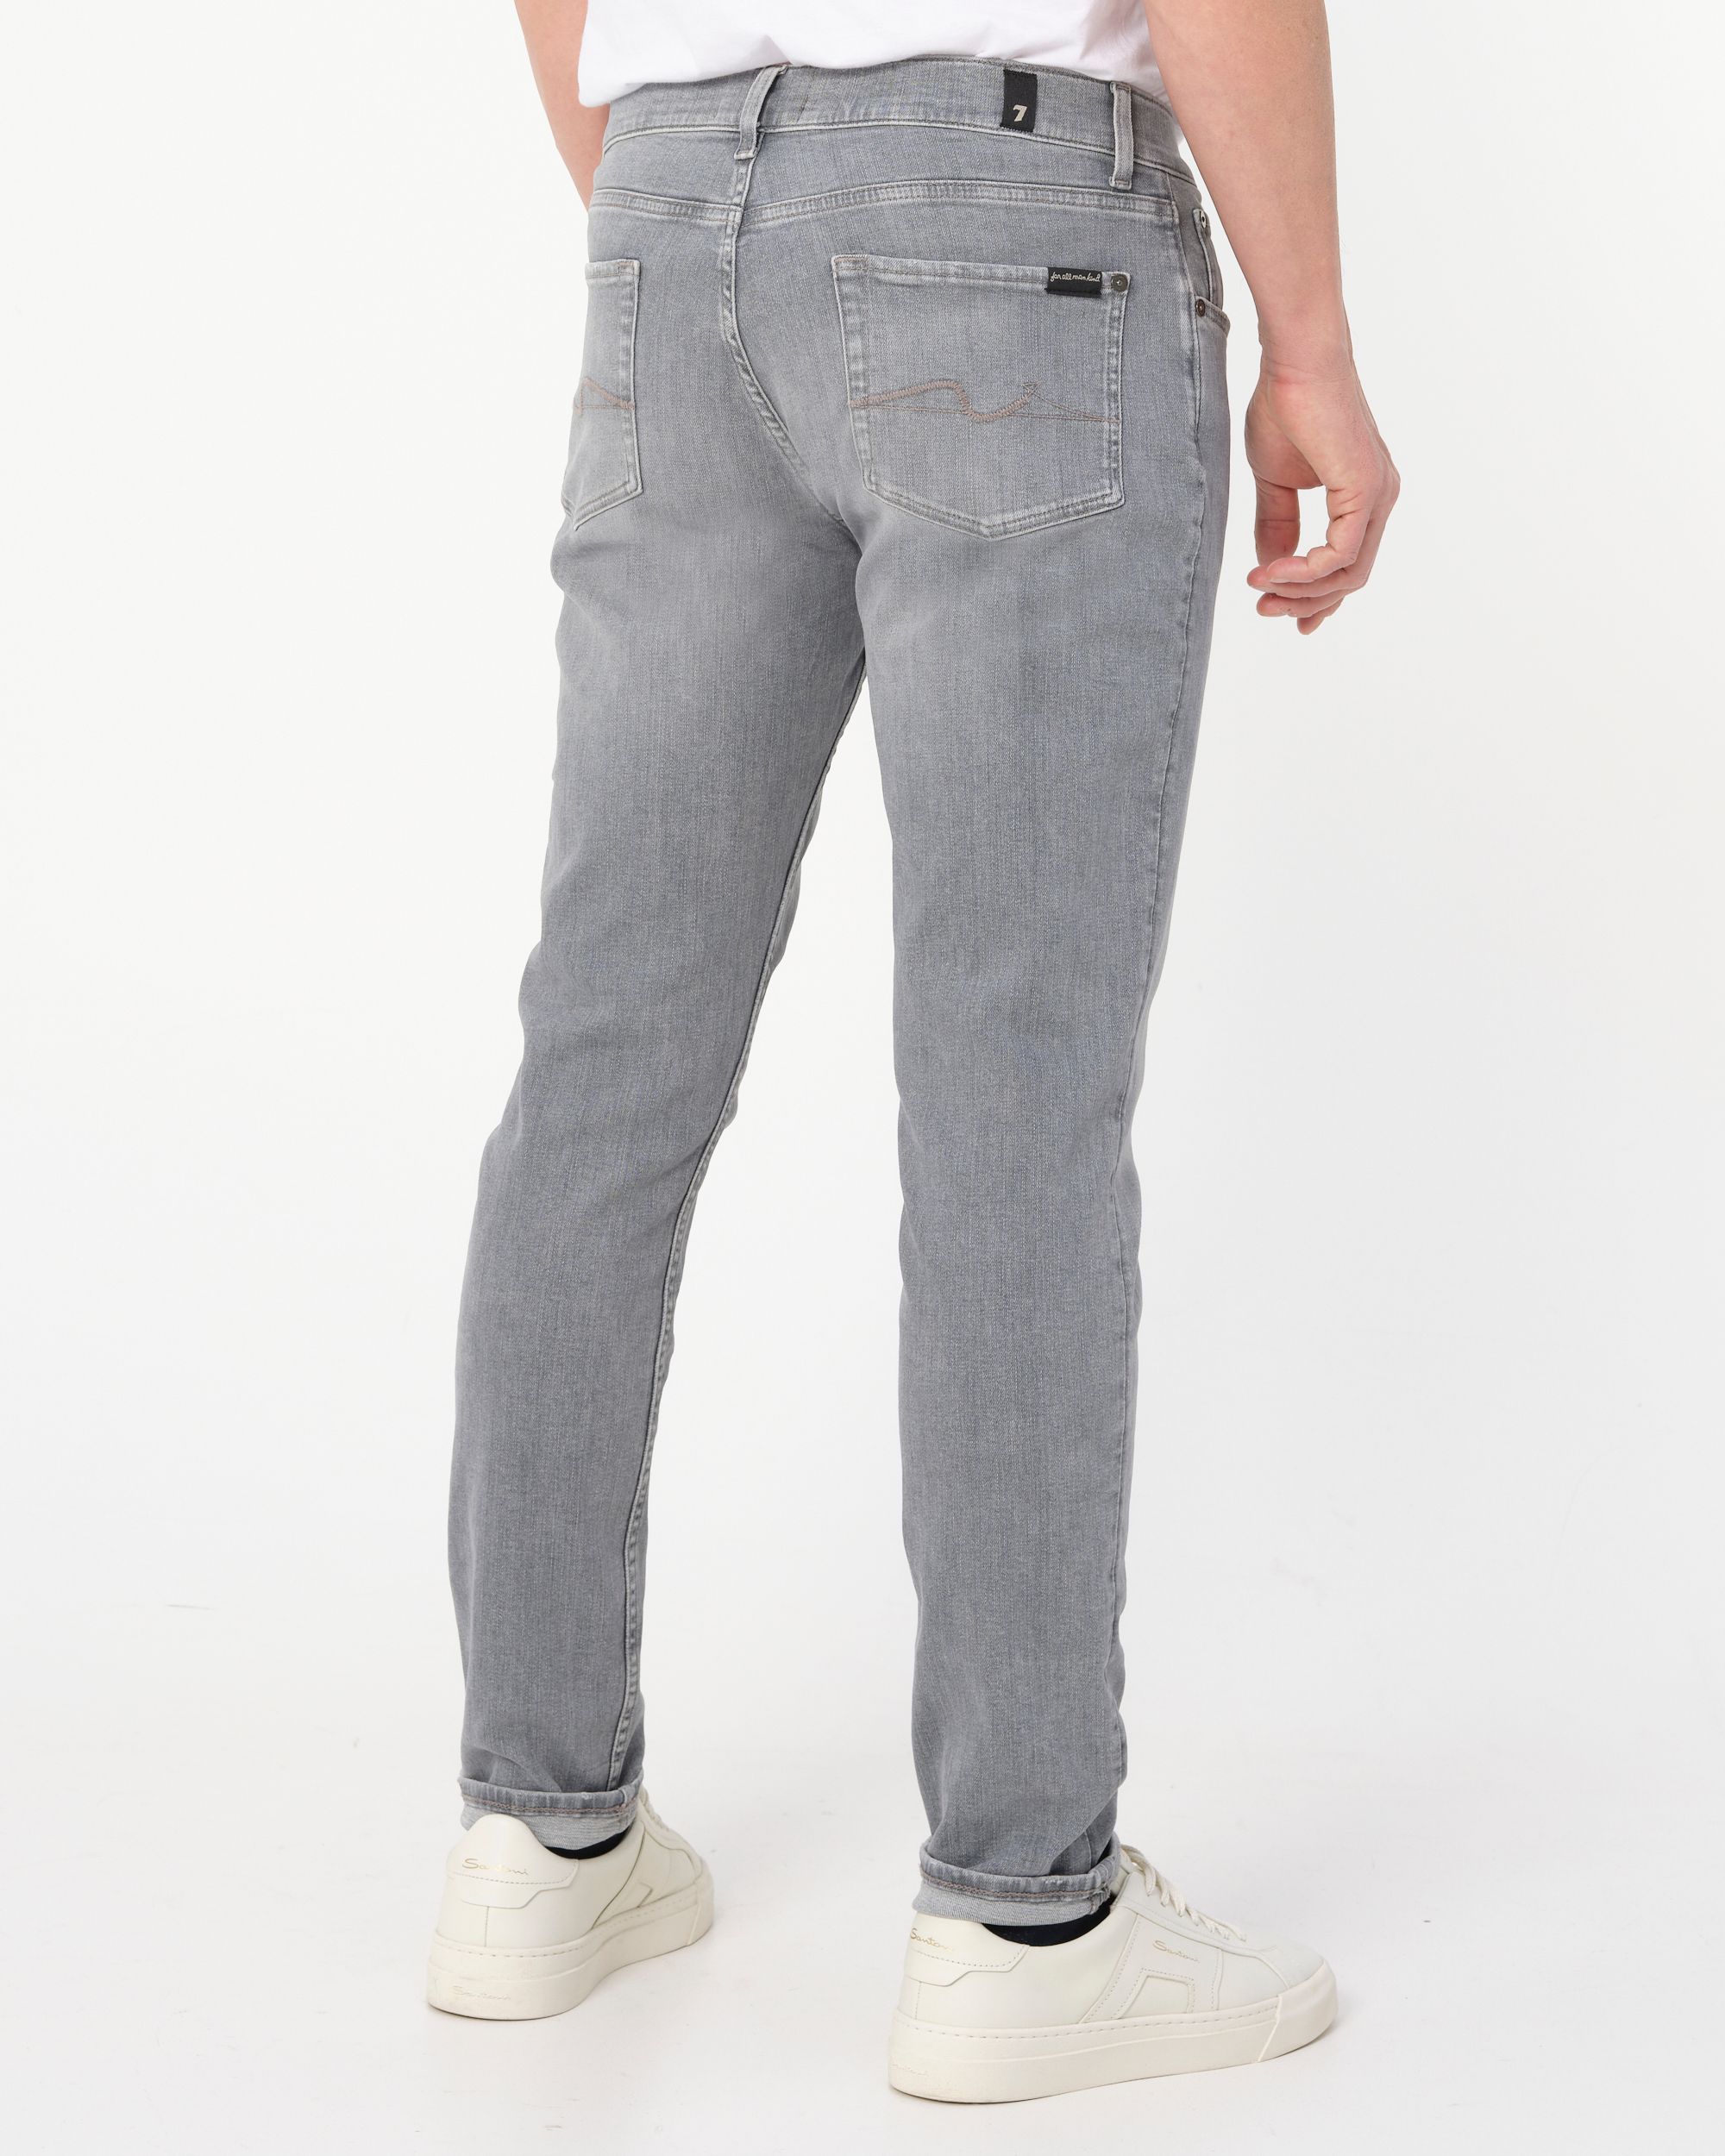 Seven for all mankind Jeans Grijs 091550-001-30